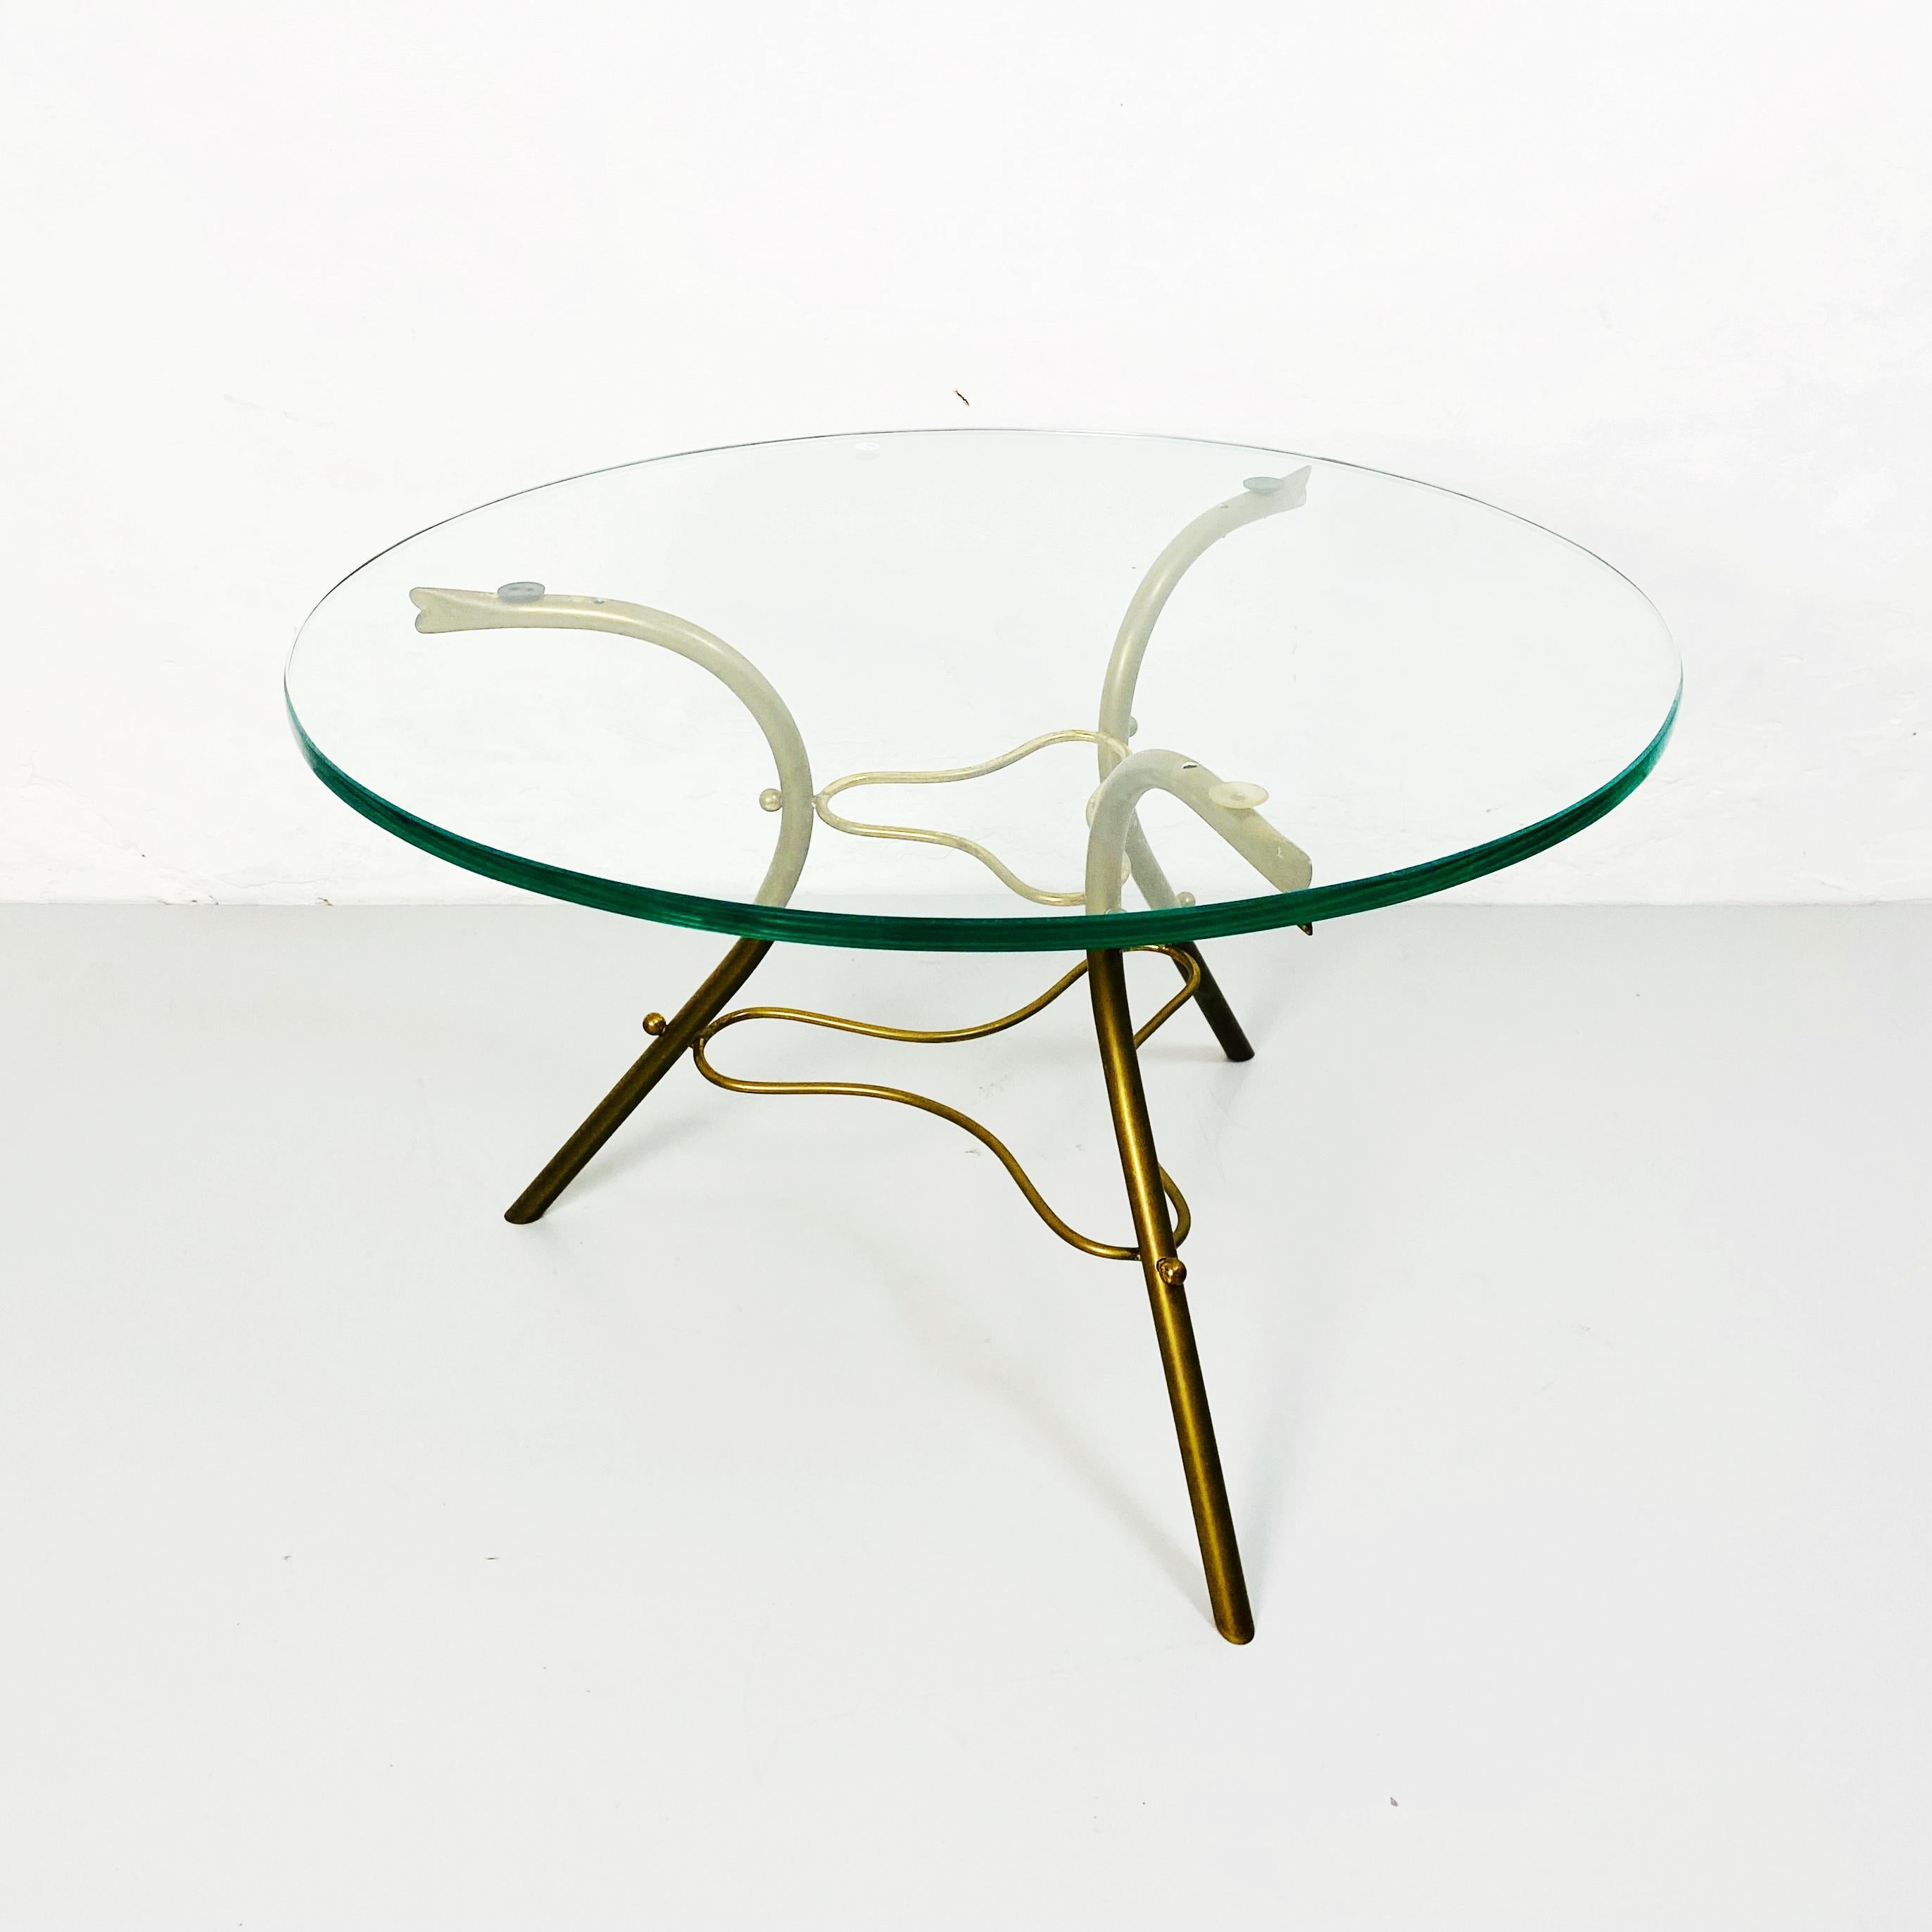 Italian Mid Century Round Coffee Table with Irregular Brass Road Base, 1950s For Sale 3